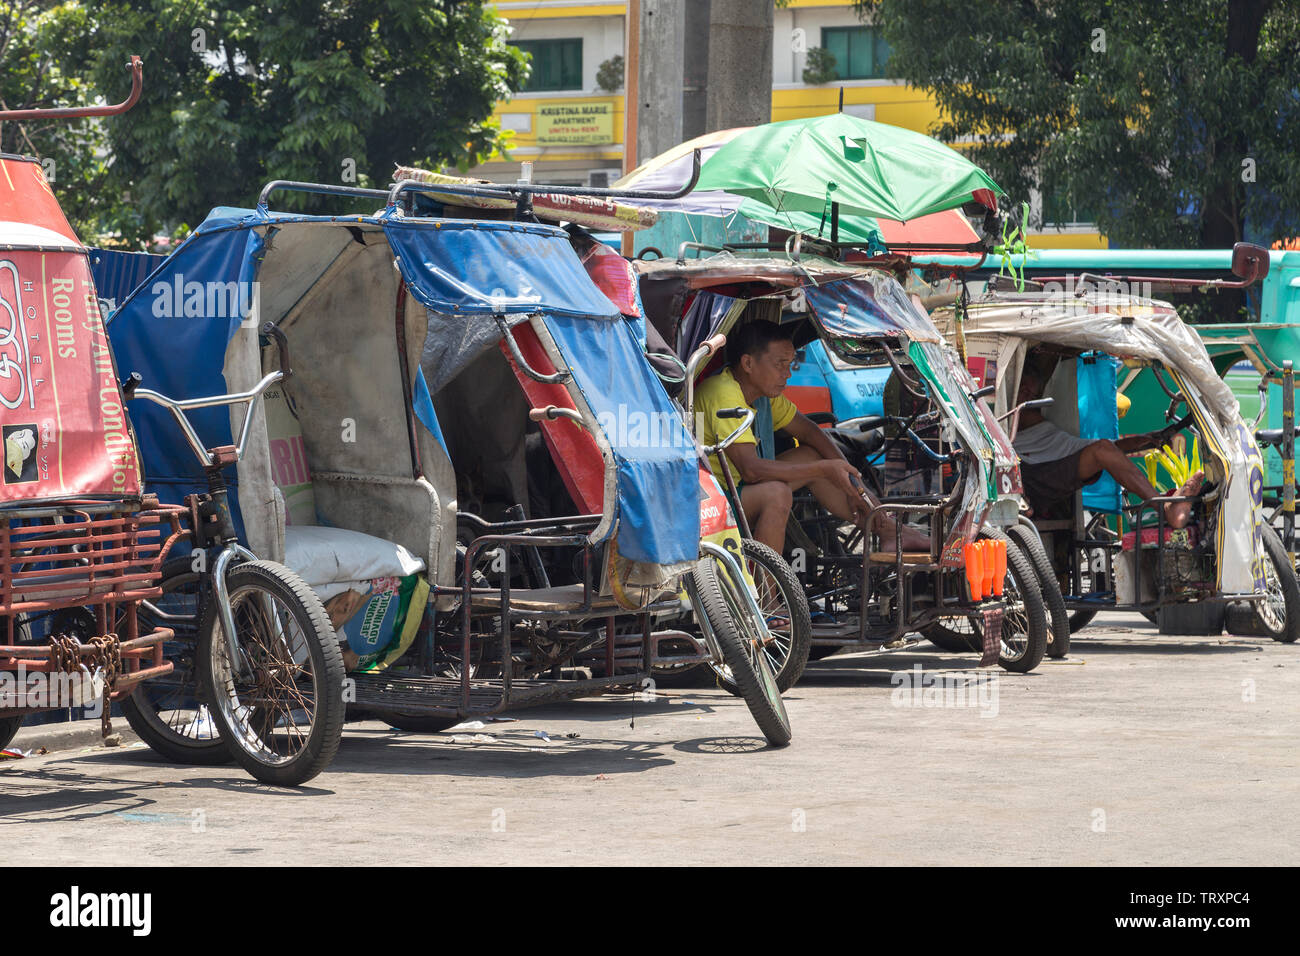 Manila, Philippines - September, 6, 2016: Philippine tricycles on the street Stock Photo